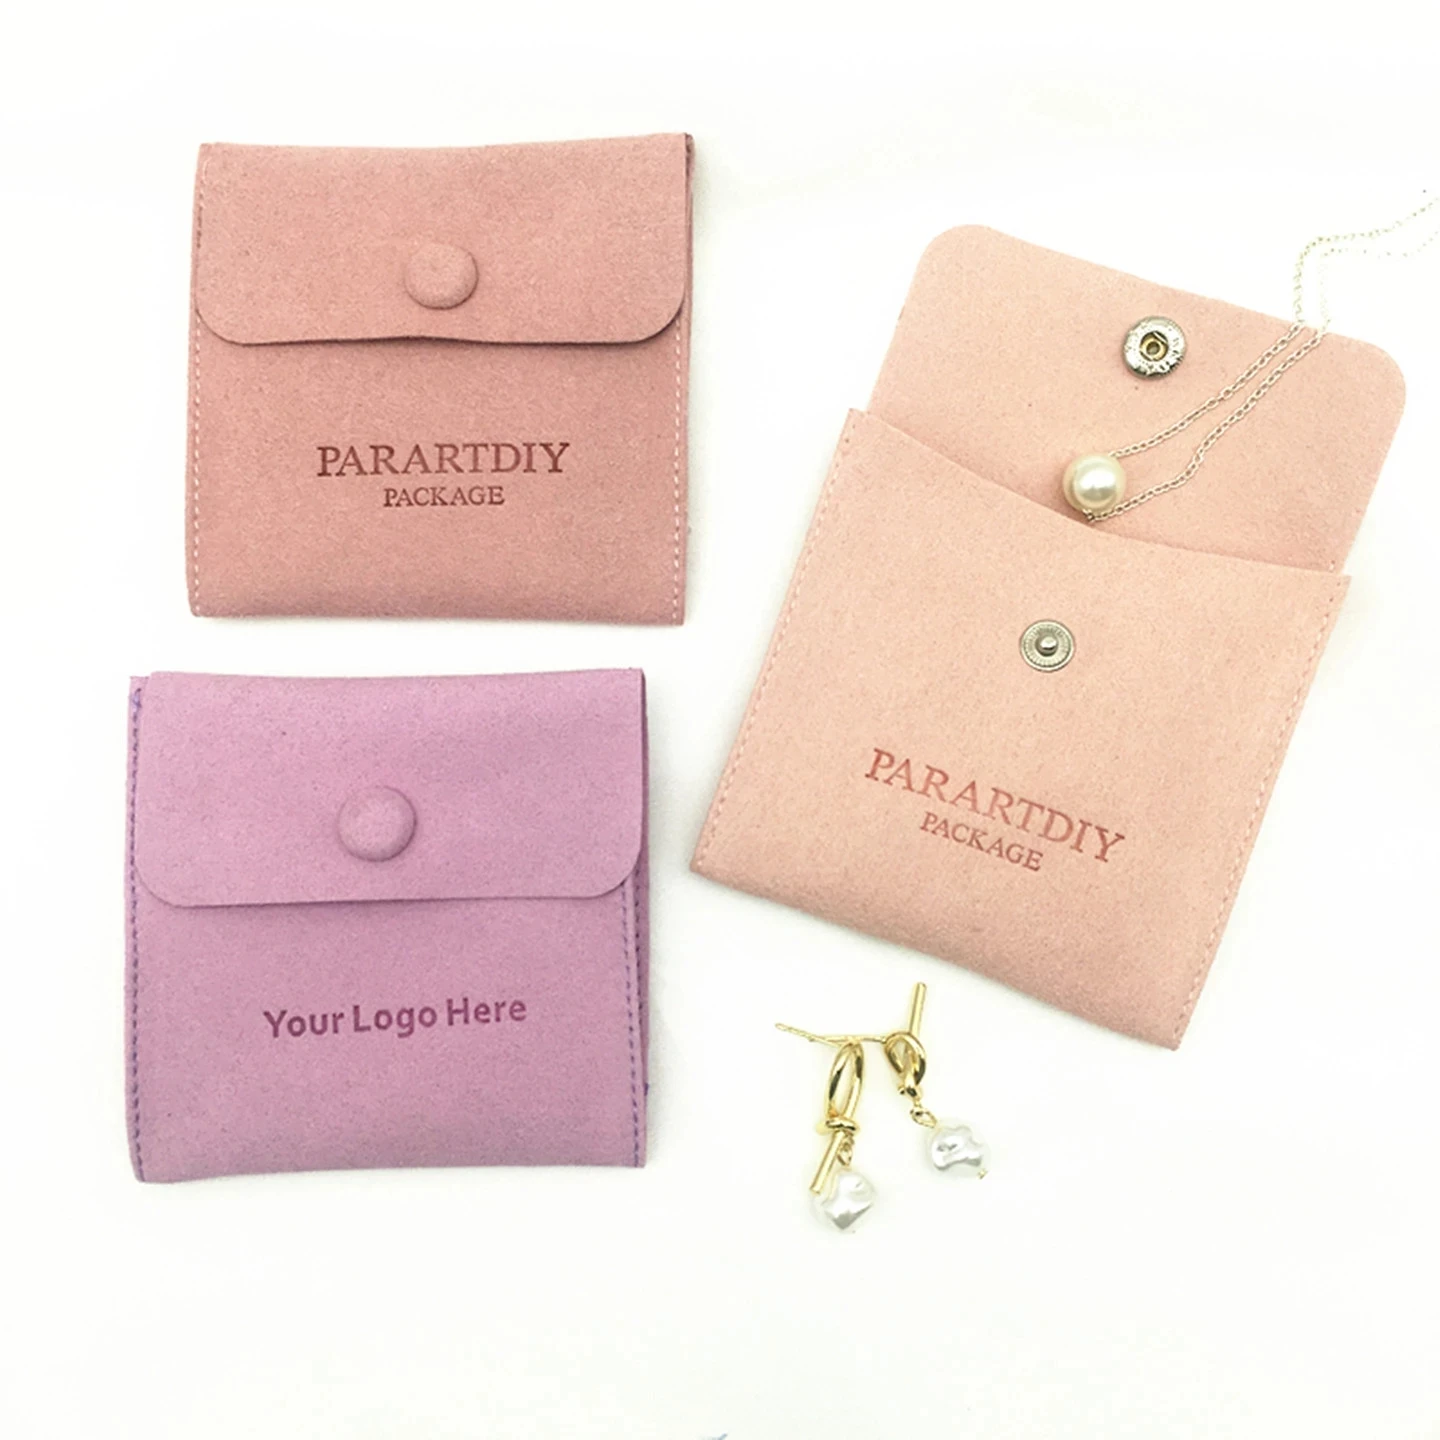 50pcs custom jewelry package supplies personalize logo microfiber pouch bag with button necklace packaging bags with logo